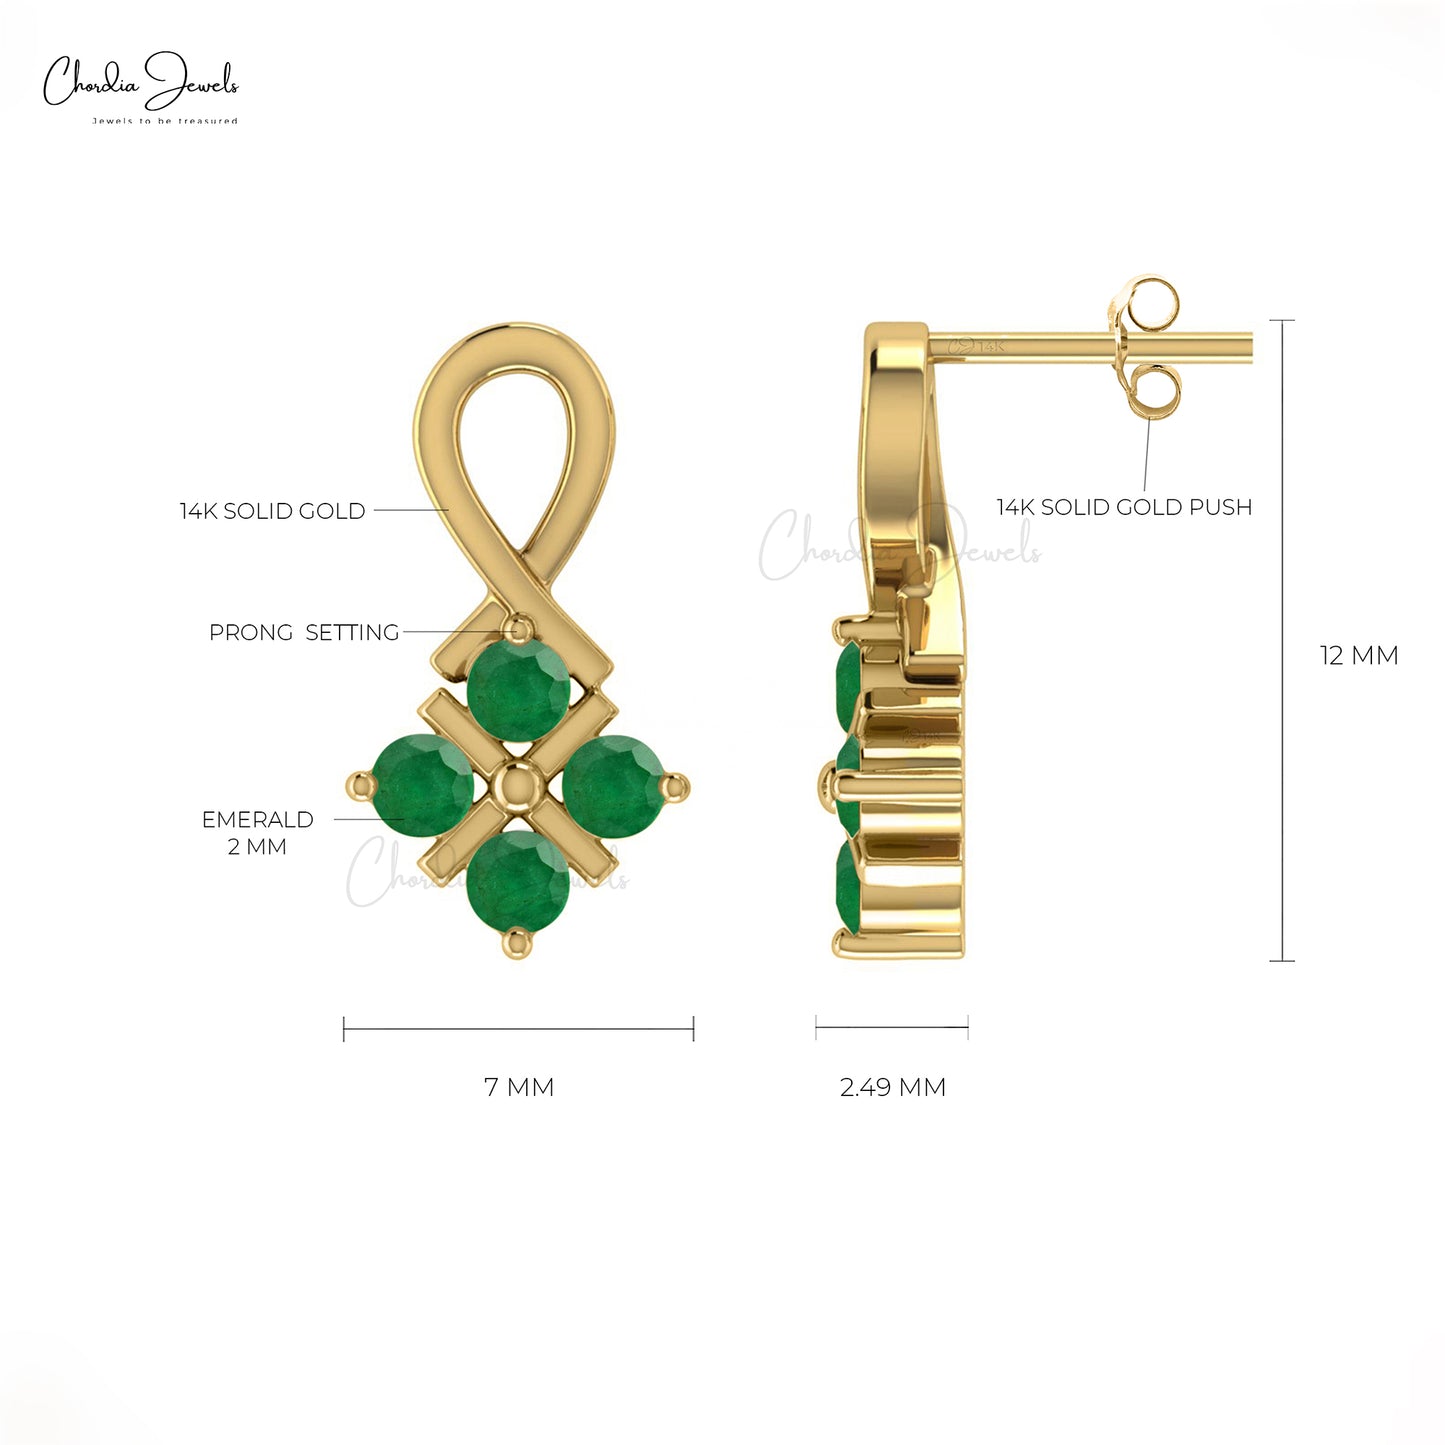 Take next step towards elegance with our emerald gemstone earrings.